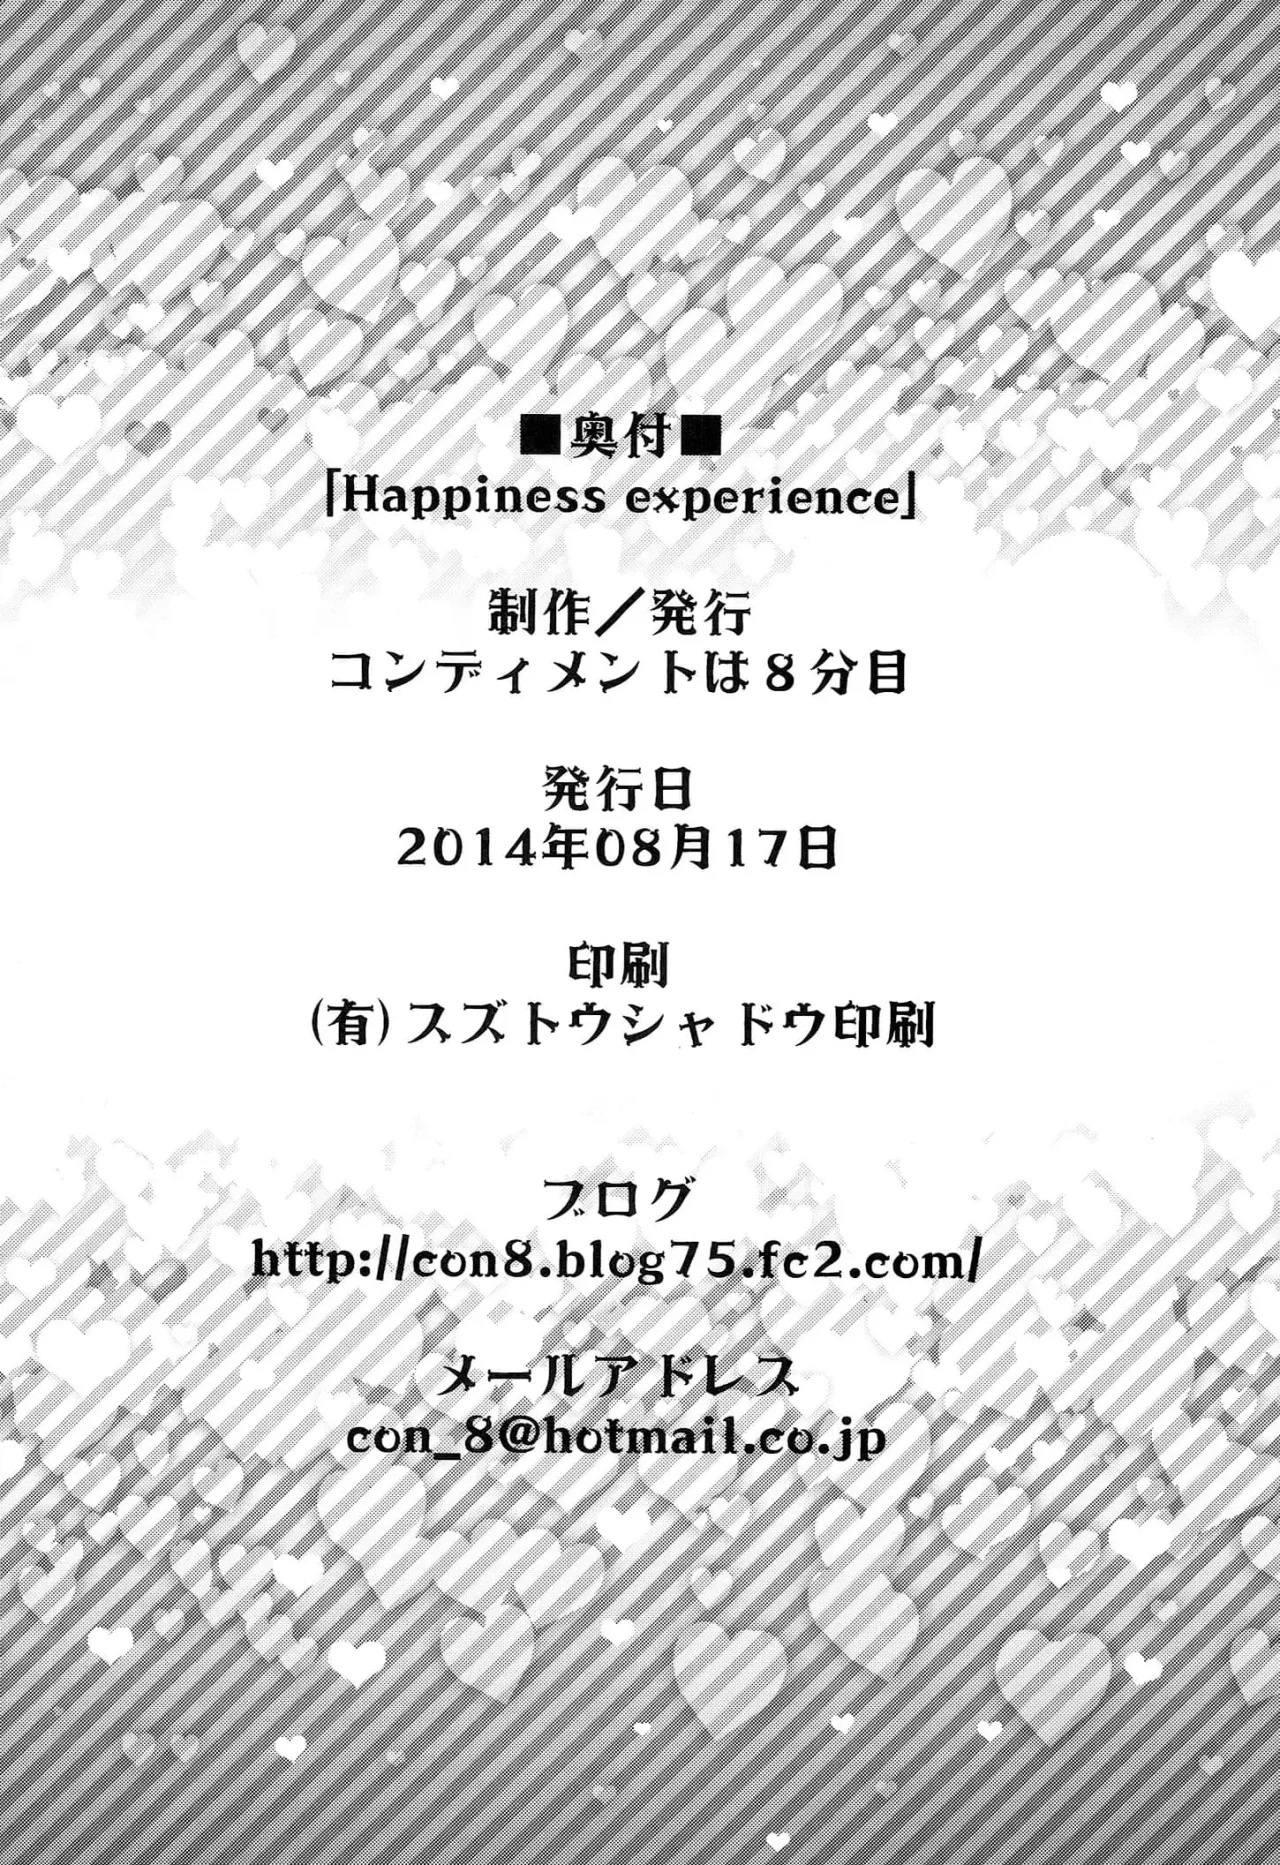 Happiness experience 1 y 2 - 36